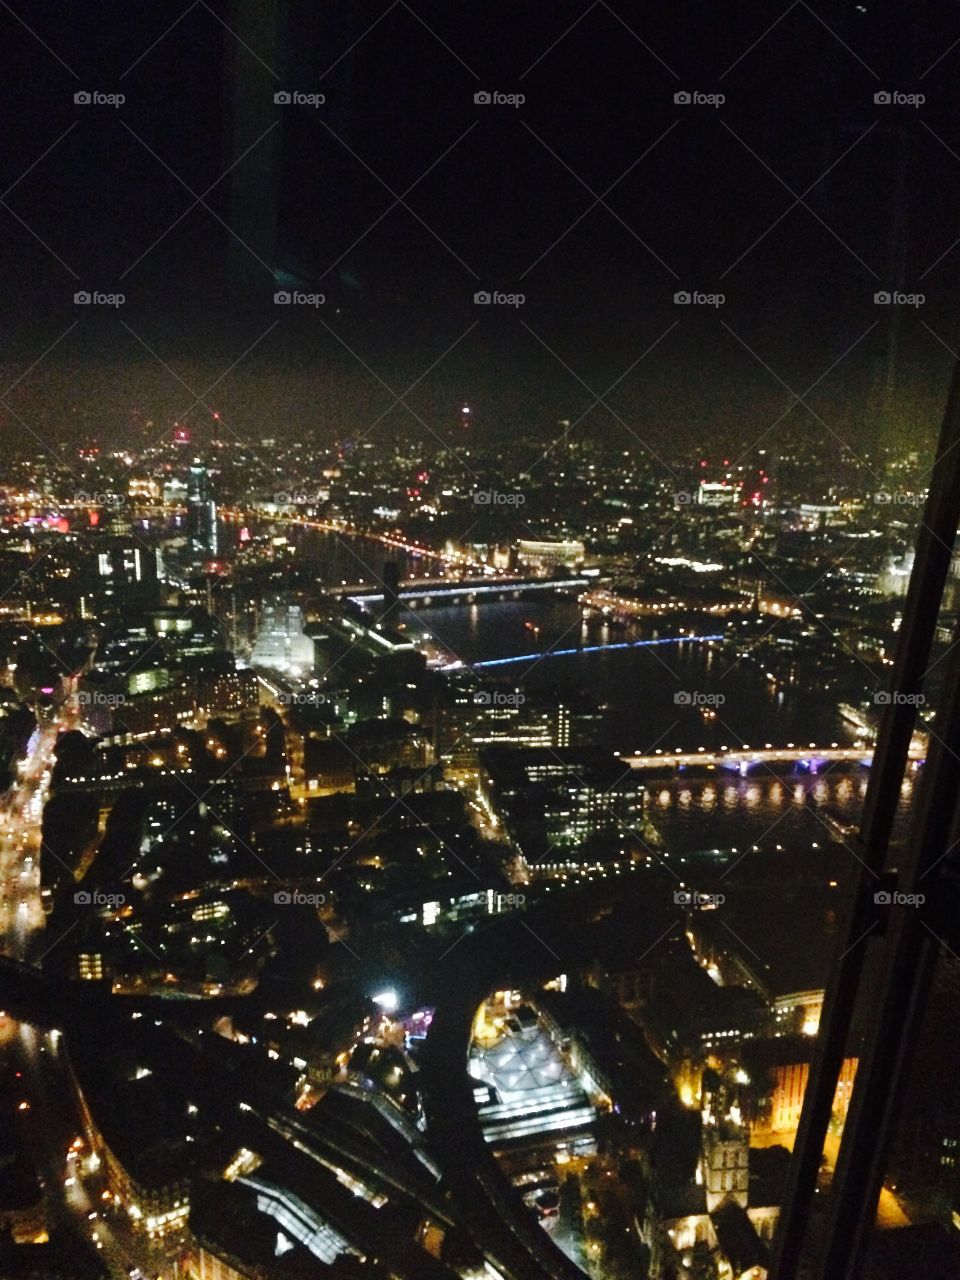 London by night. View from the Shard